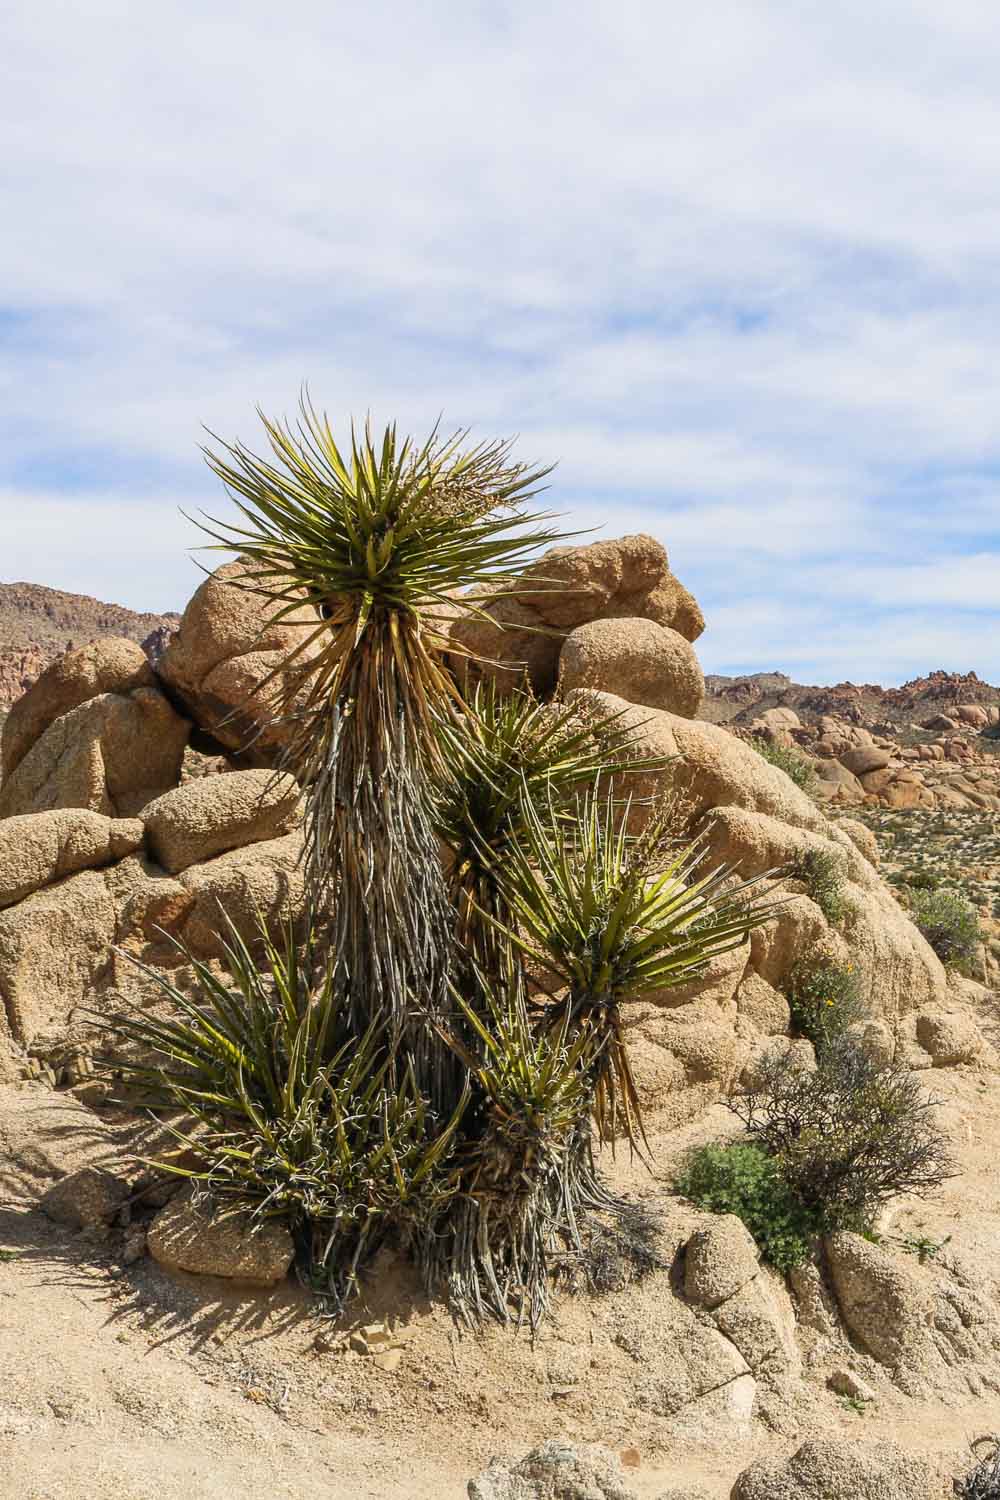 Colorado Desert landscape scenery on the Lost Palms Oasis Trail in Joshua Tree National Park, California